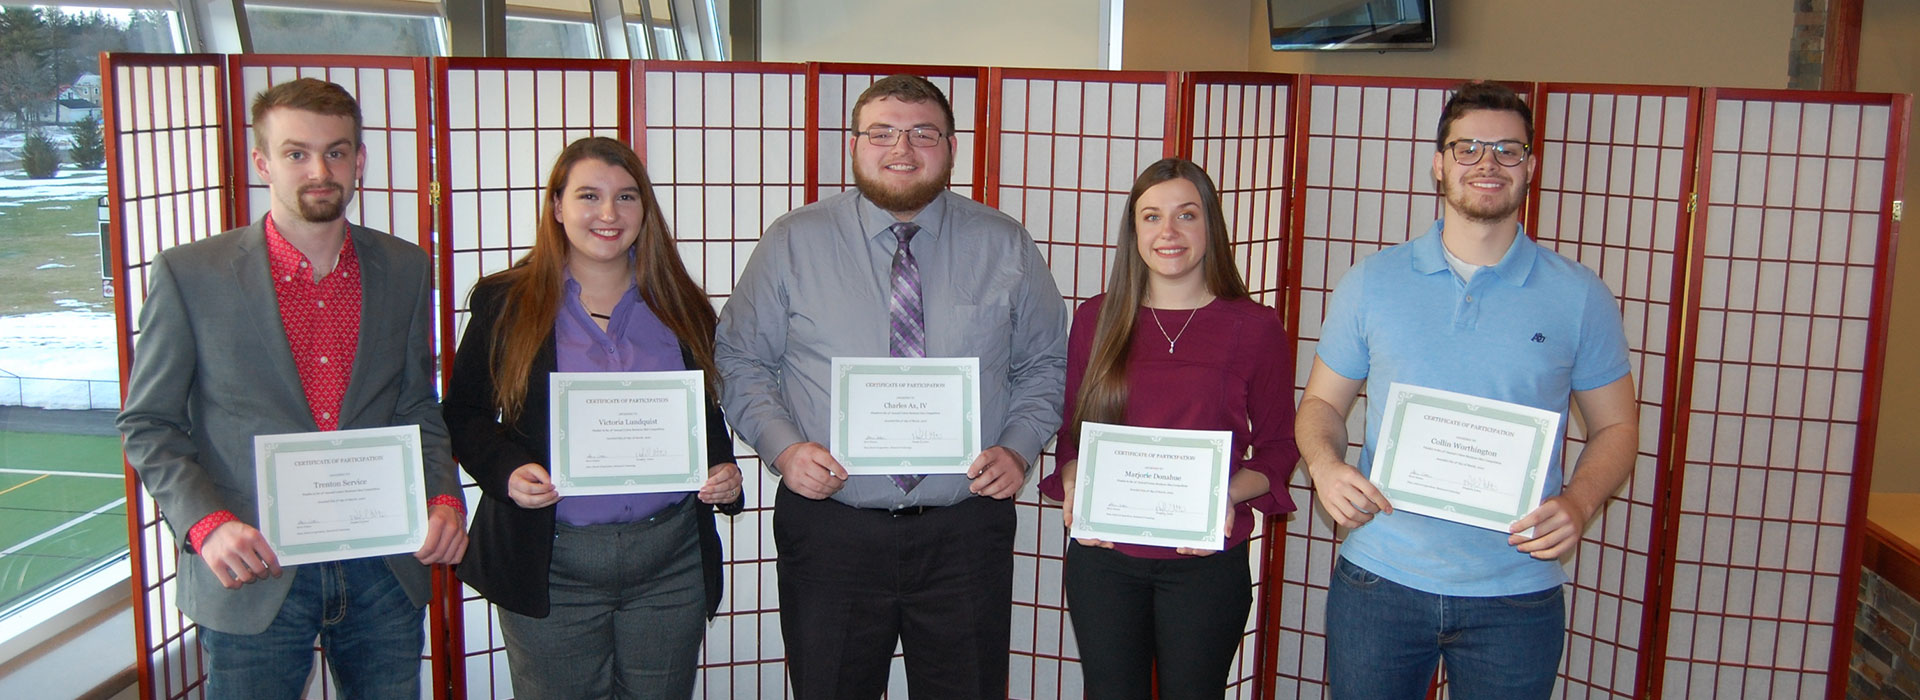 Students pose after the Fourth Annual Cotton Business Idea Competition, from left; Trenton Service, Victoria Lundquist, Charles (Jacob) Ax IV, Marjorie Donahue, Collin Worthington